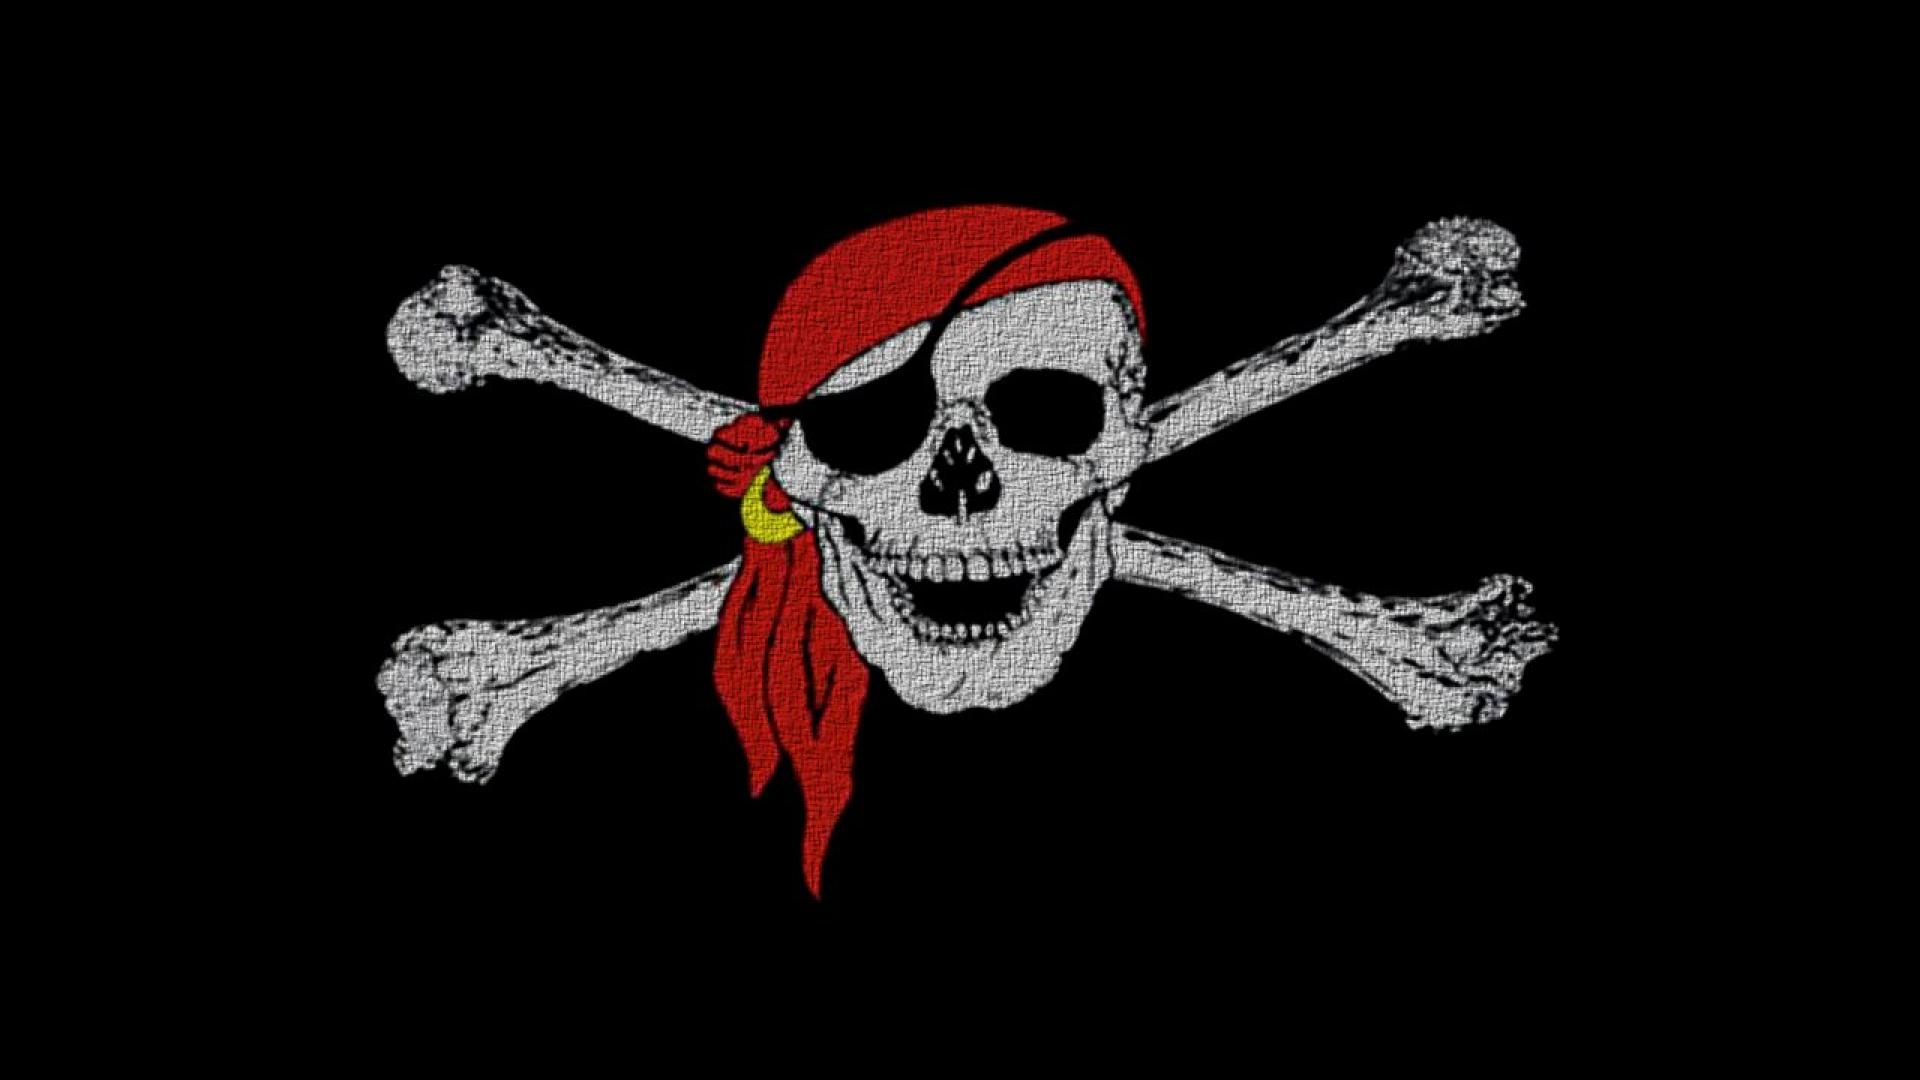 Skull and crossbones wallpaper - - High Quality and other